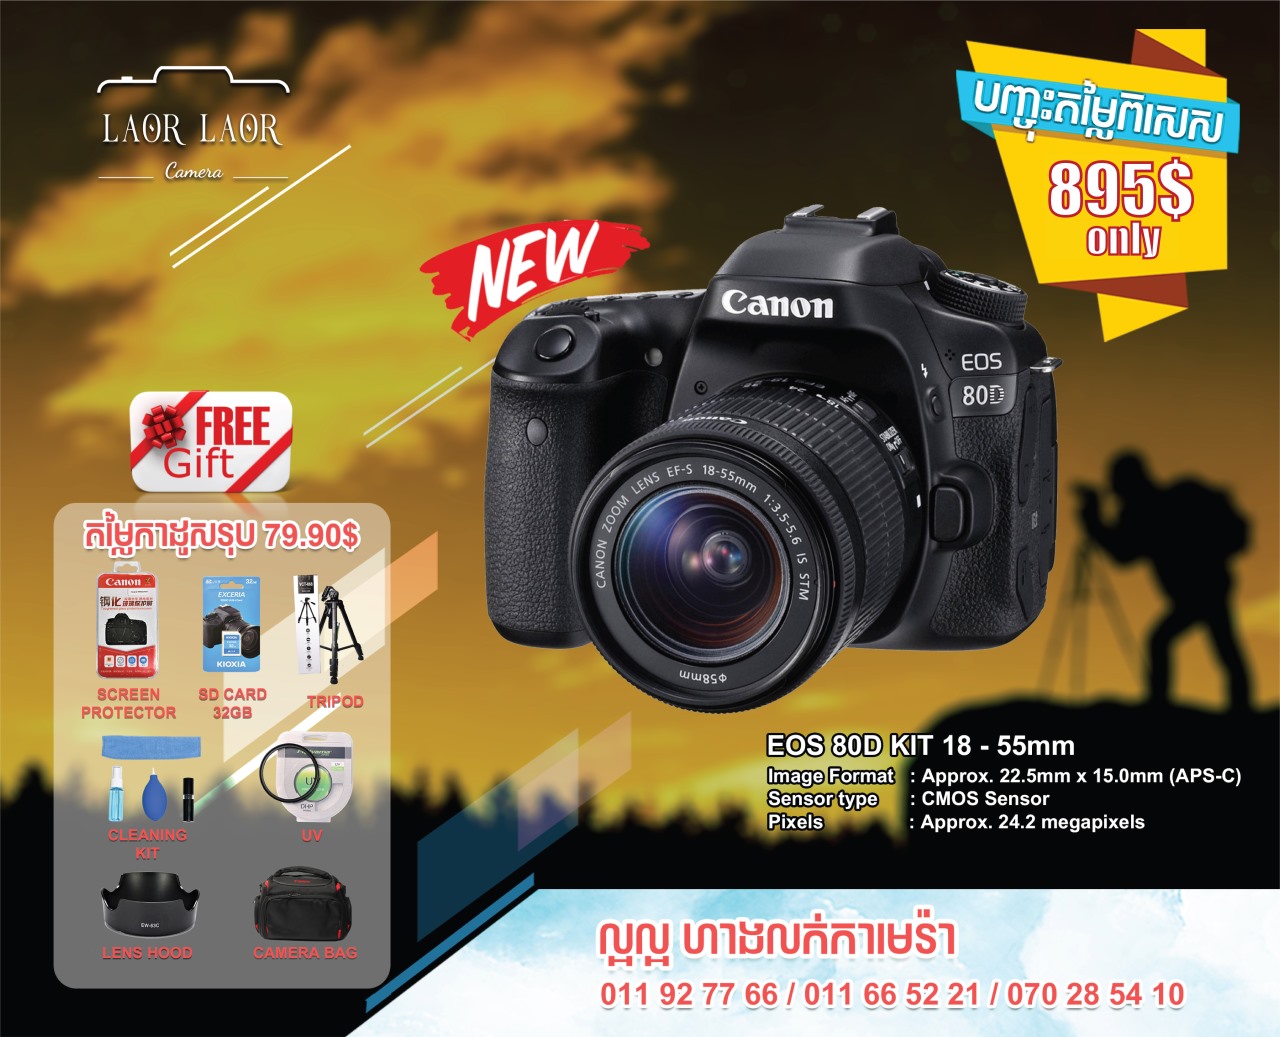 Canon EOS 80D kit 18-55mm (set) - out of stock